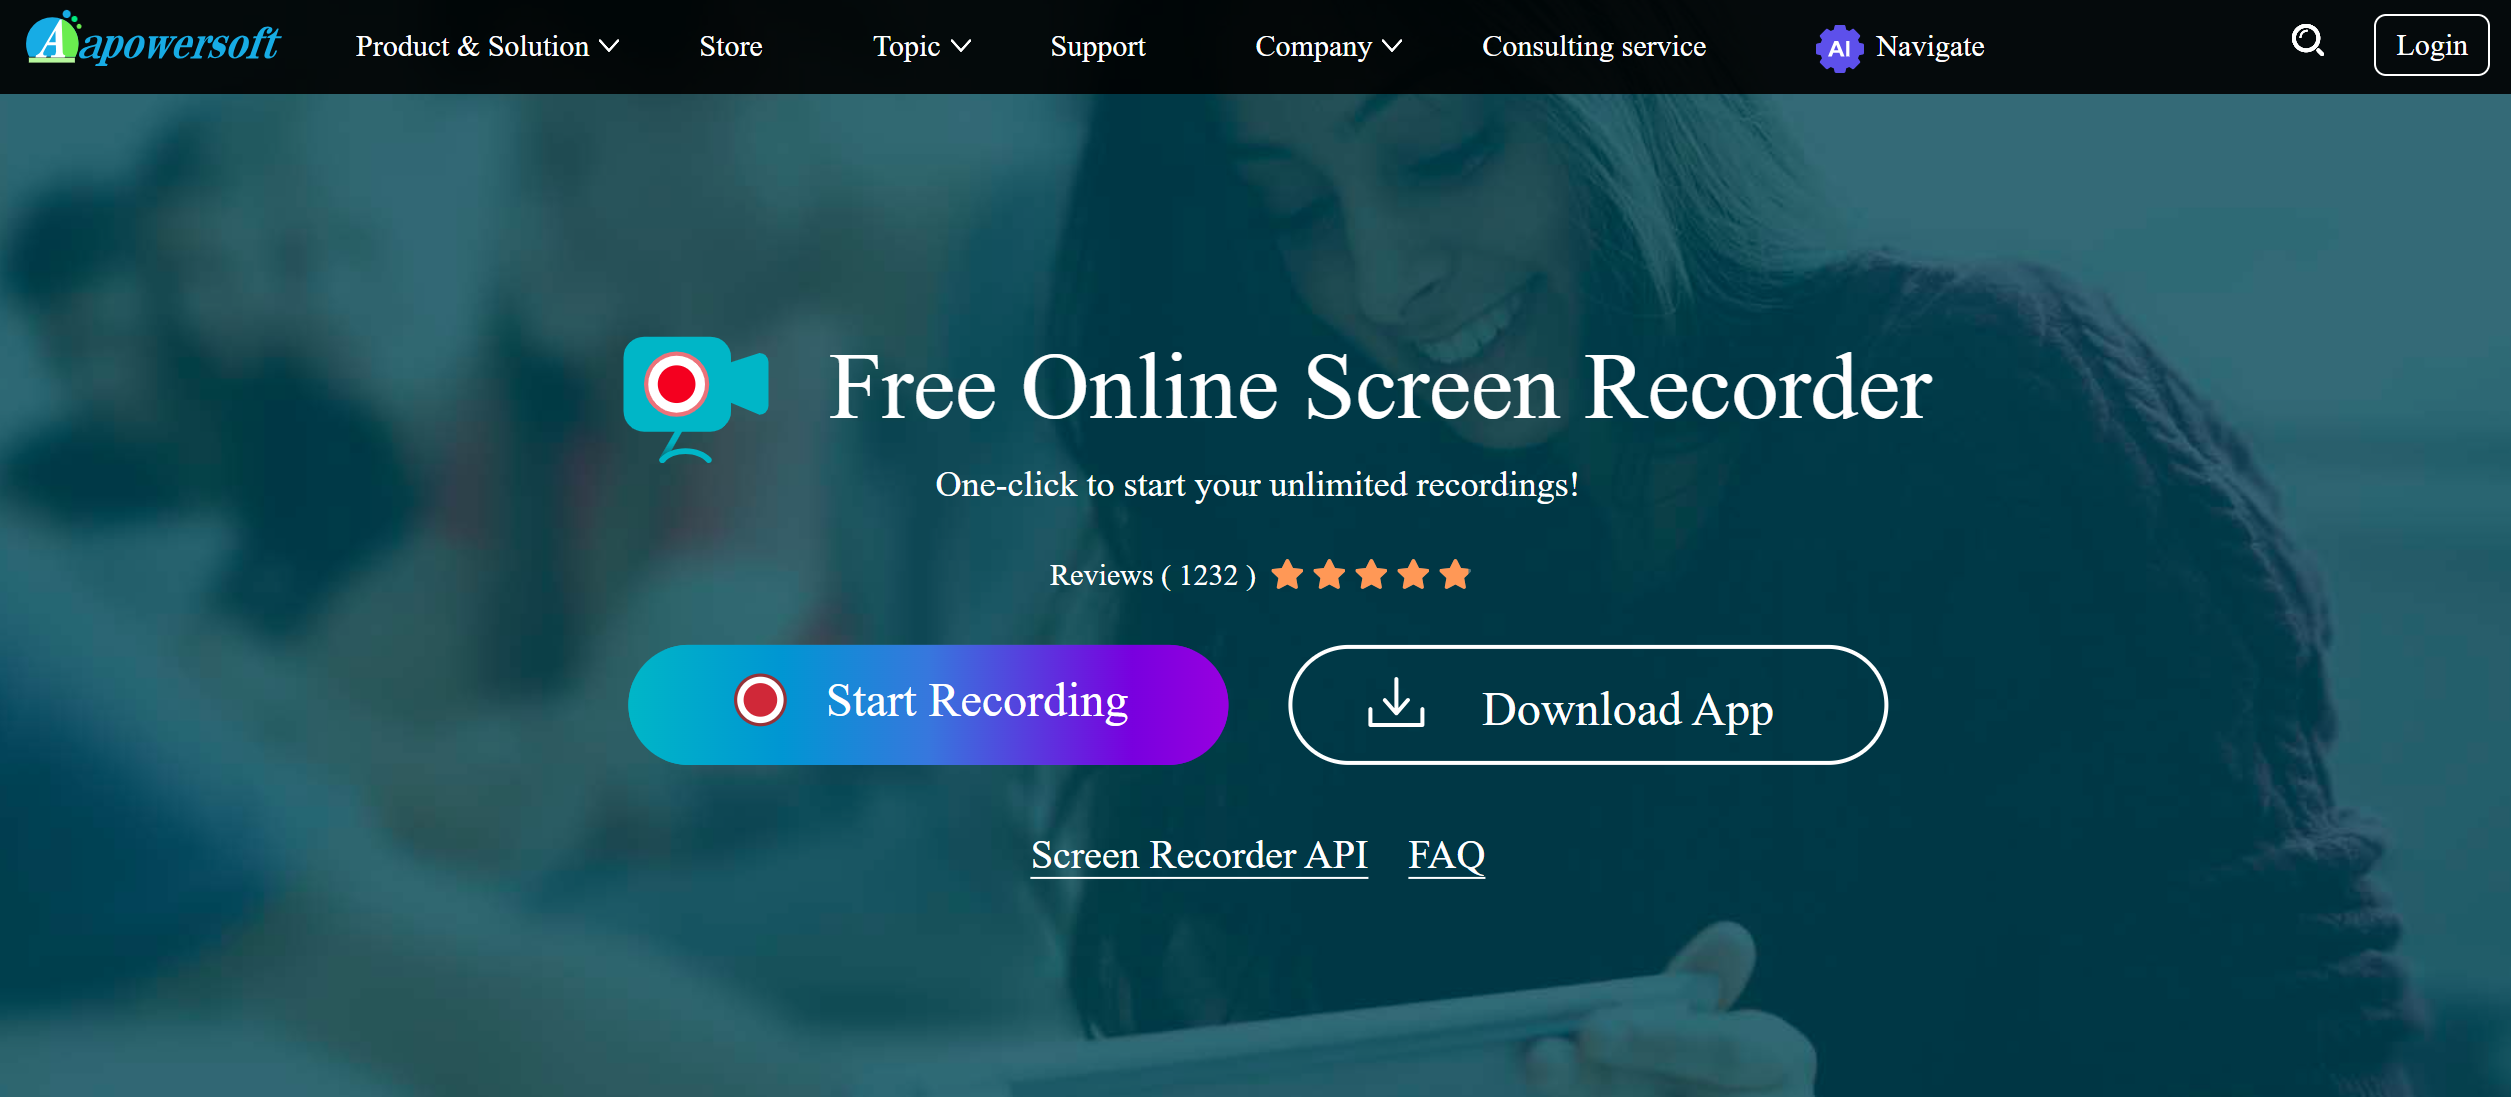  Apowersoft Free Online Screen Recorder